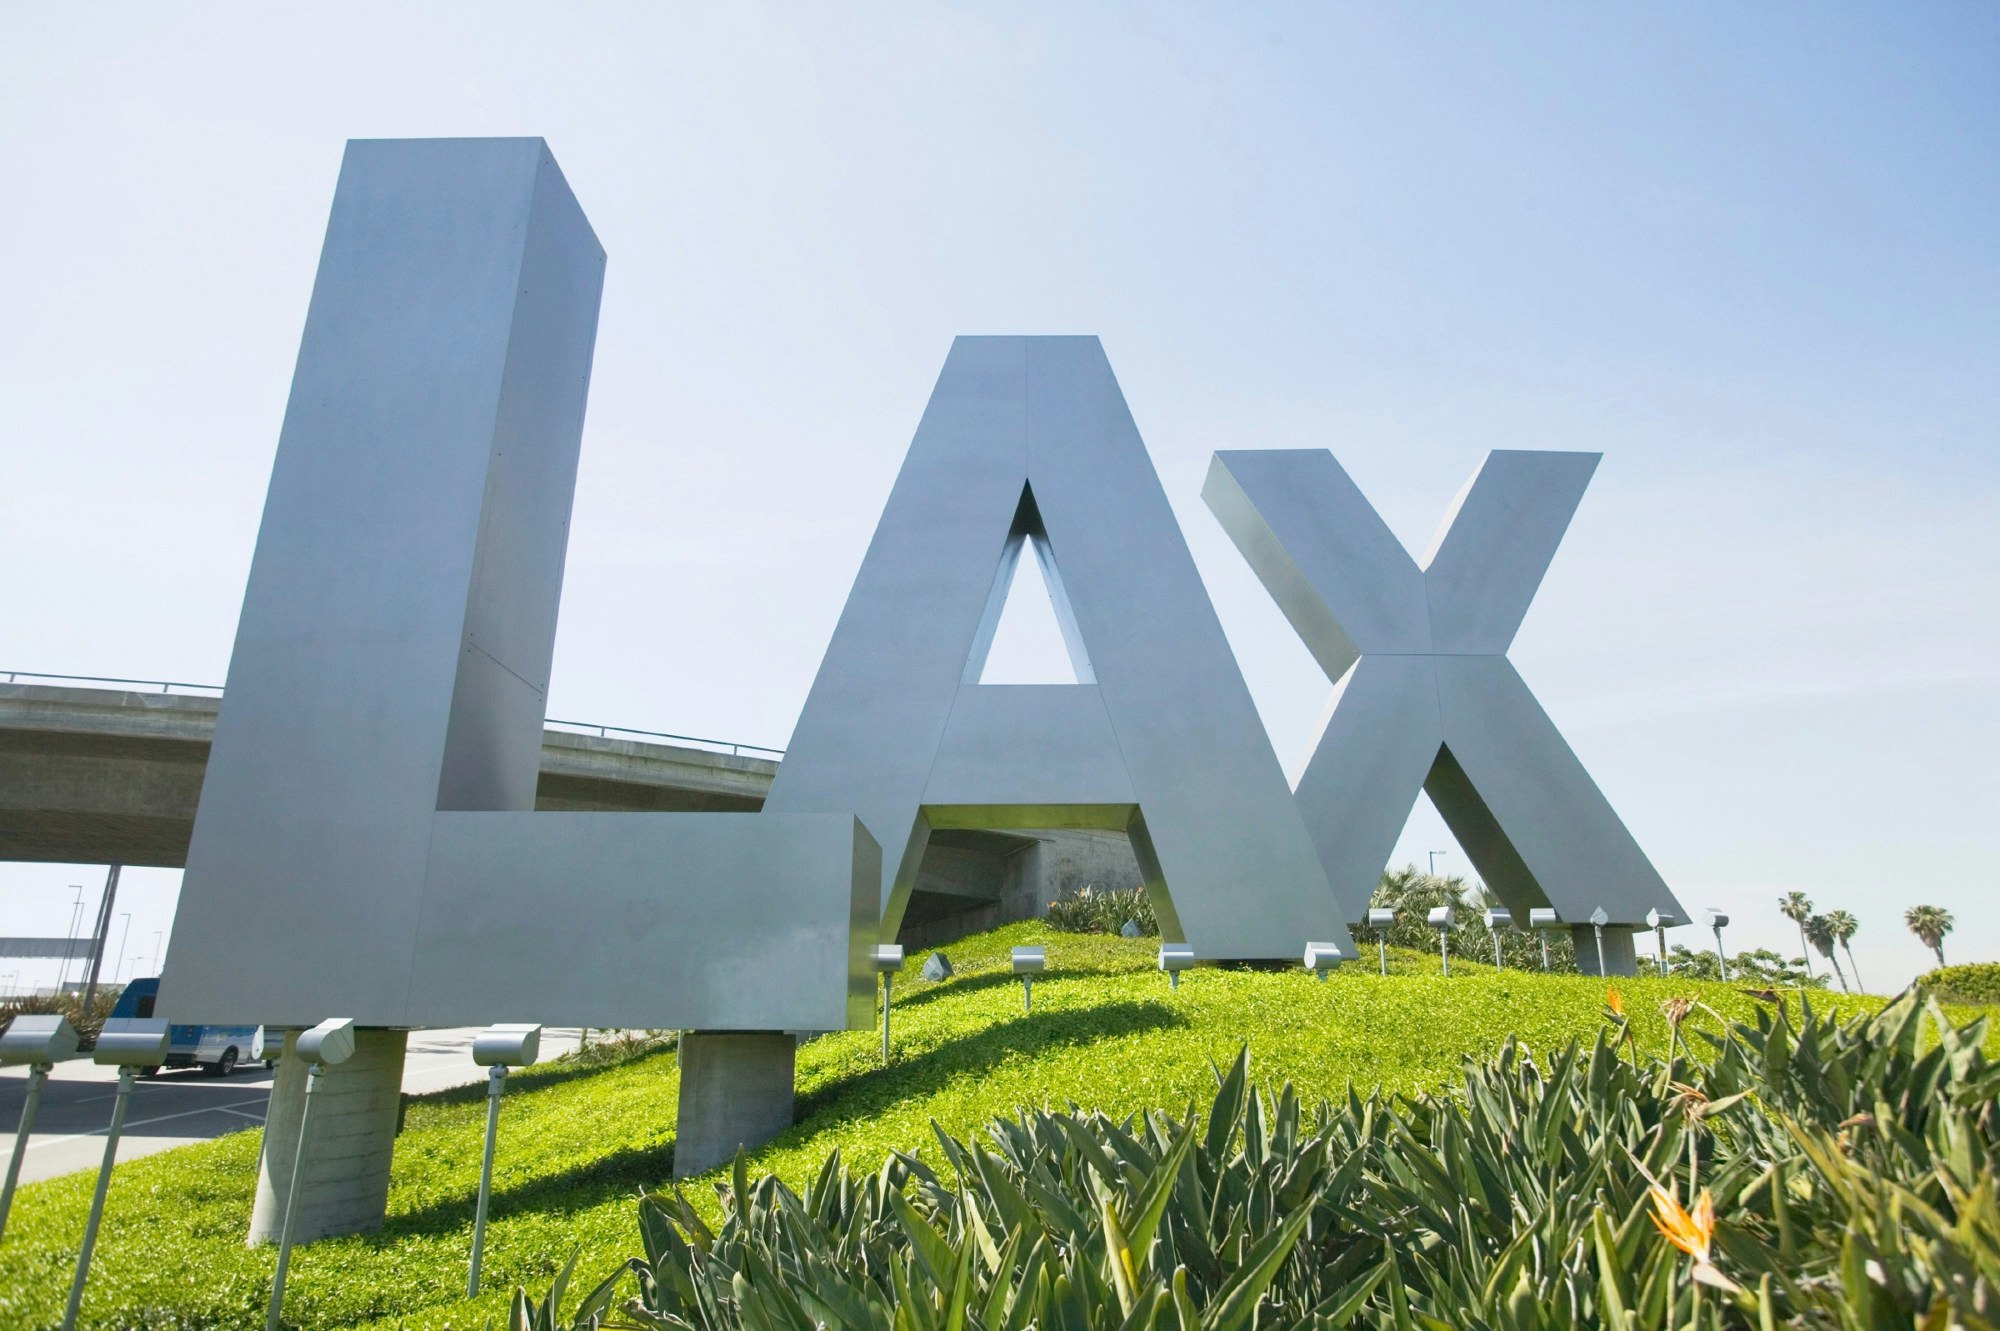 The LAX sign at Los Angeles International Airport